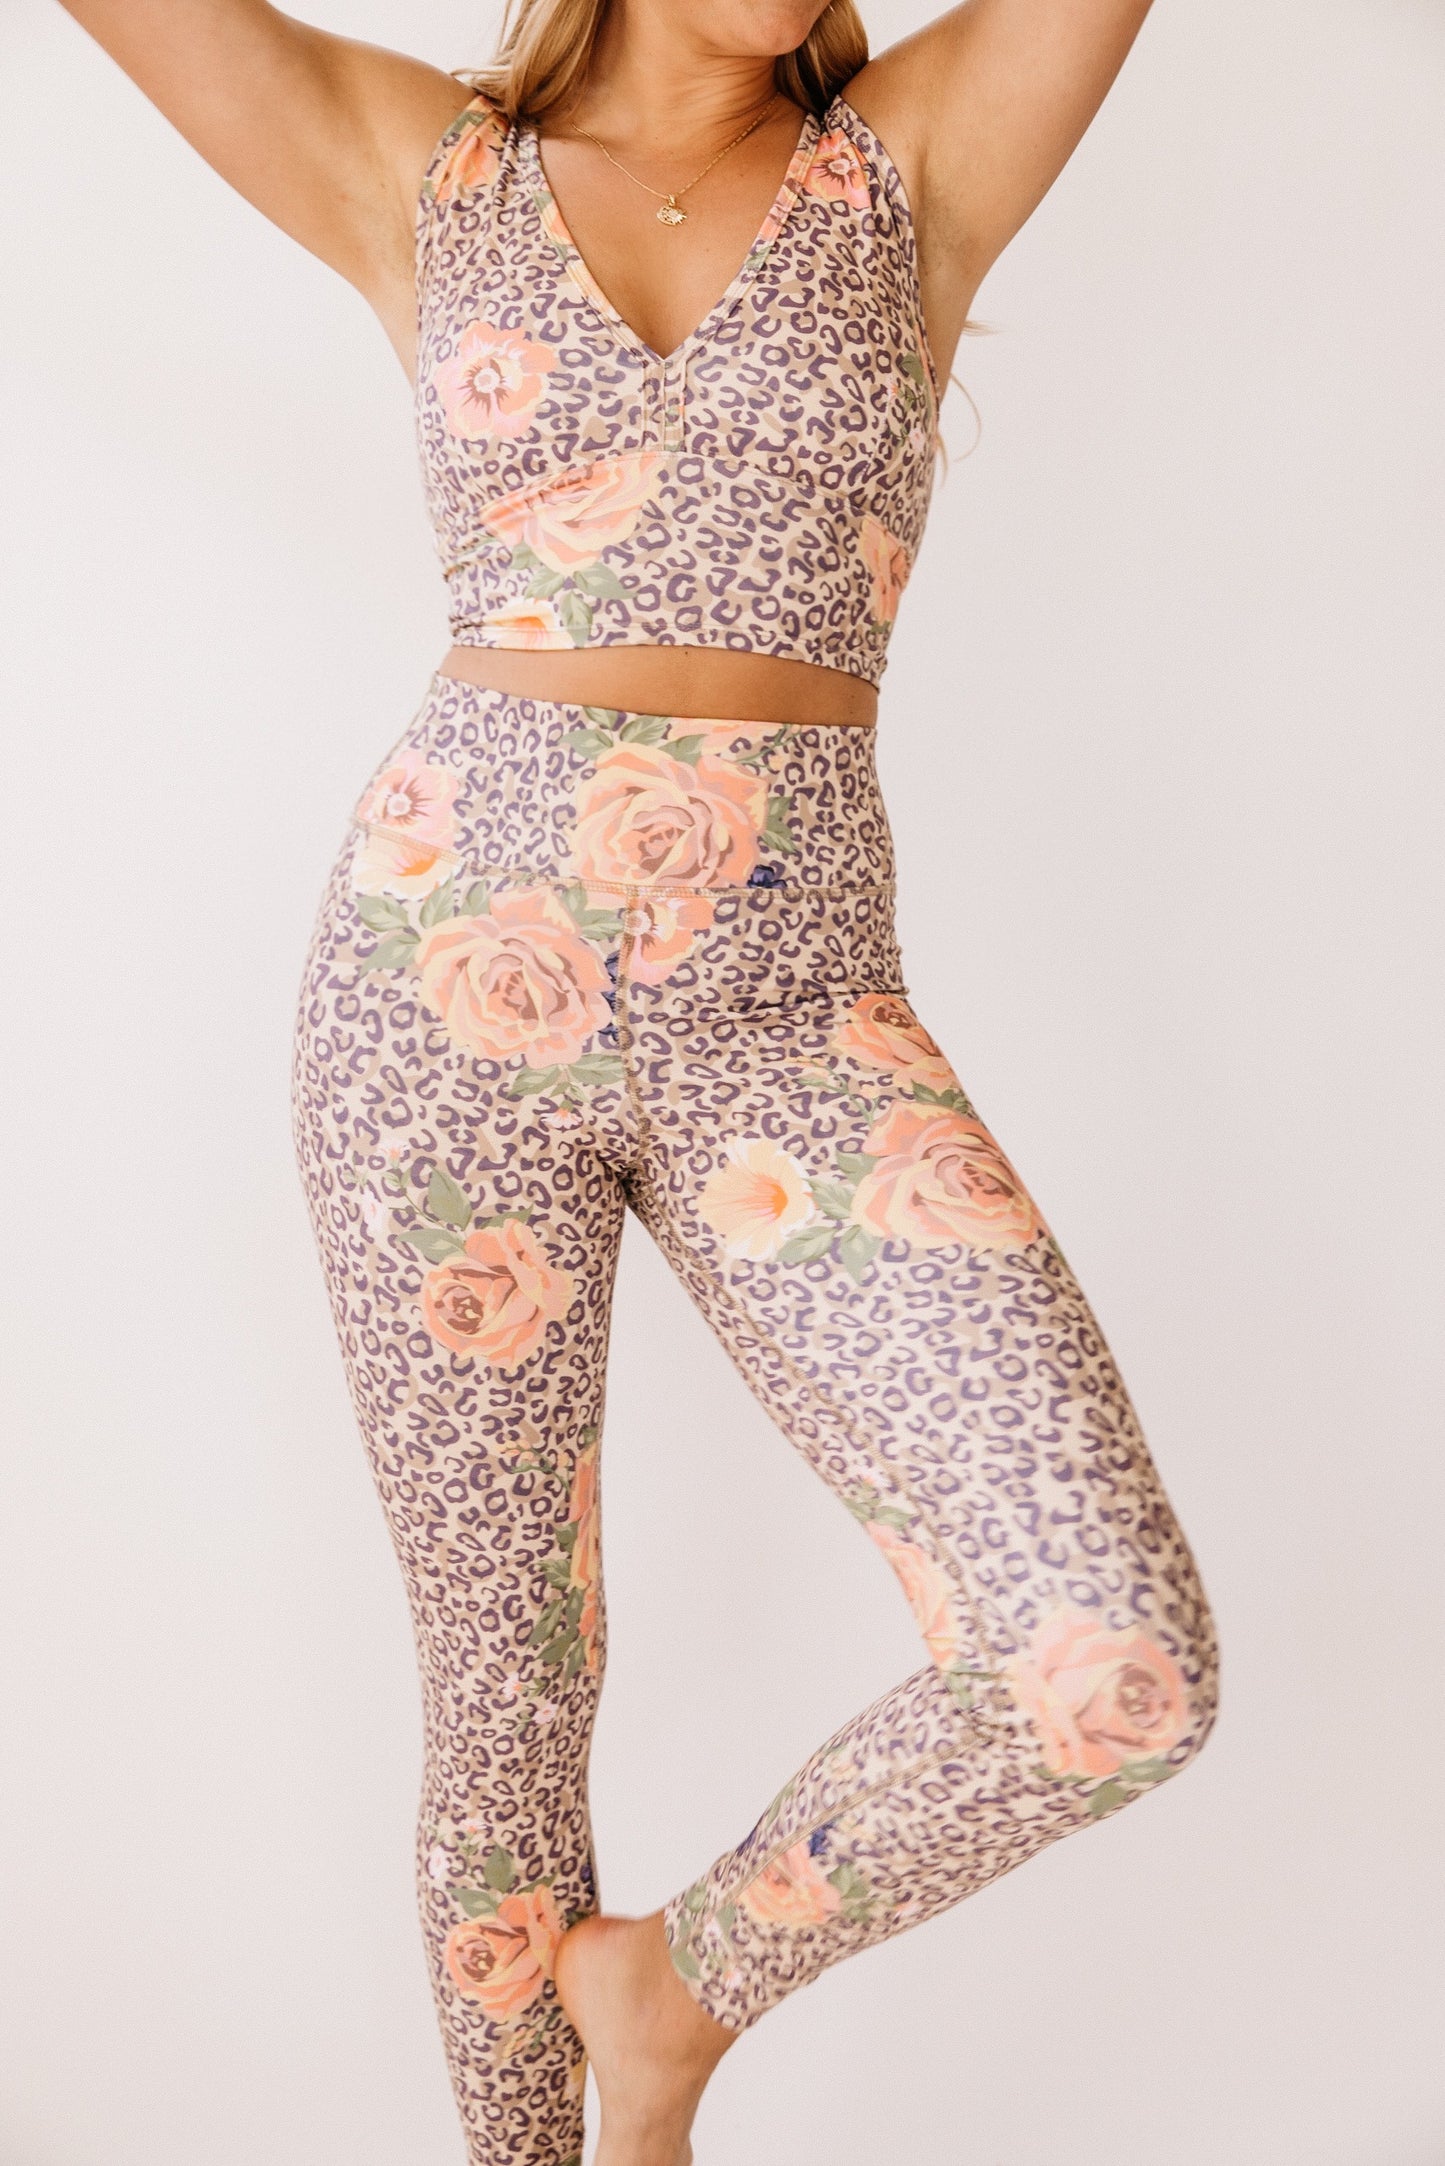 women's high waisted leggings, 82% recycled polyester, 18% spandex, floral print activewear